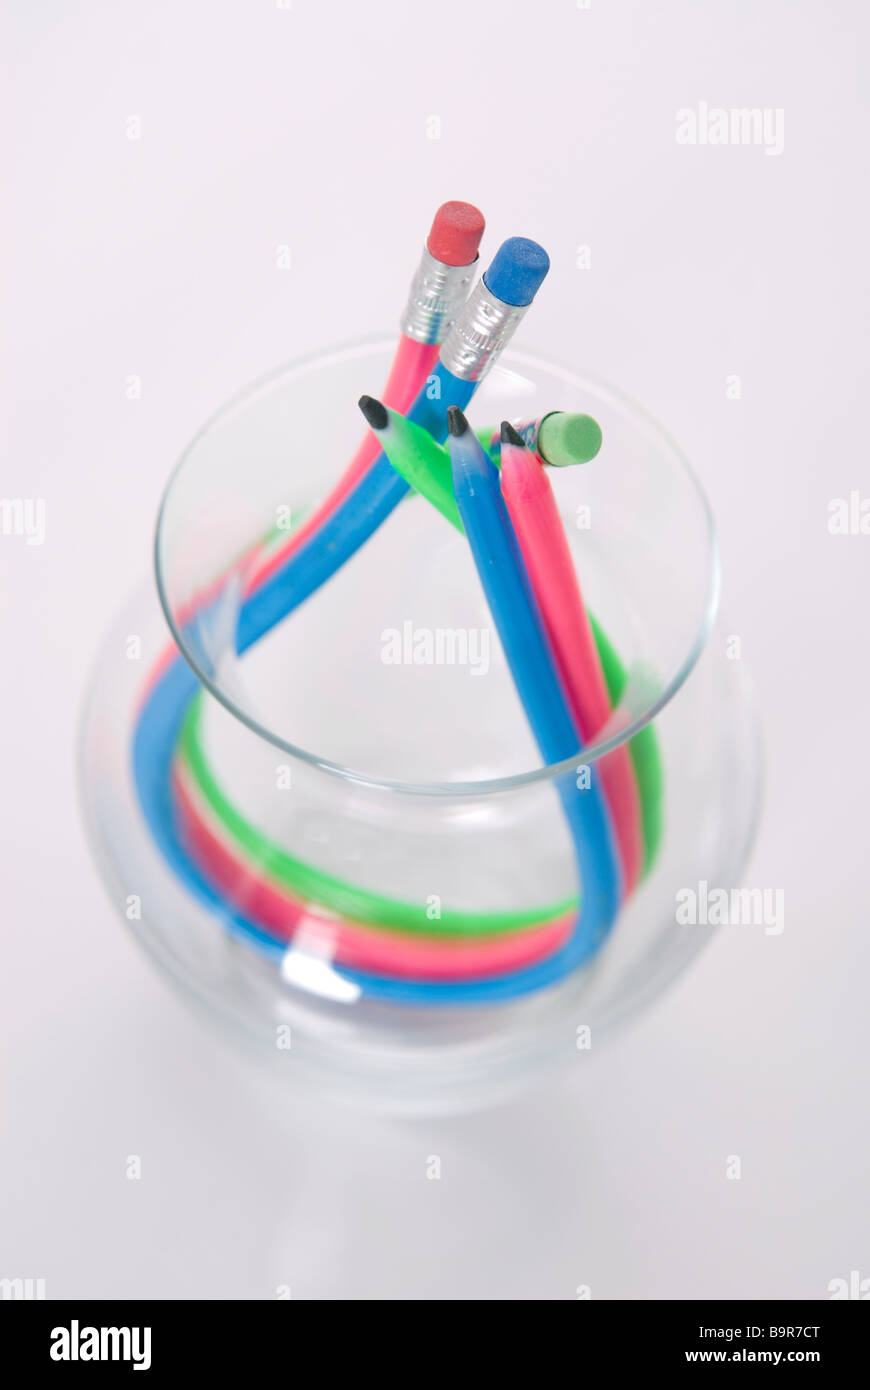 Flexible rubber pencils in a glass pot on a white background Stock Photo